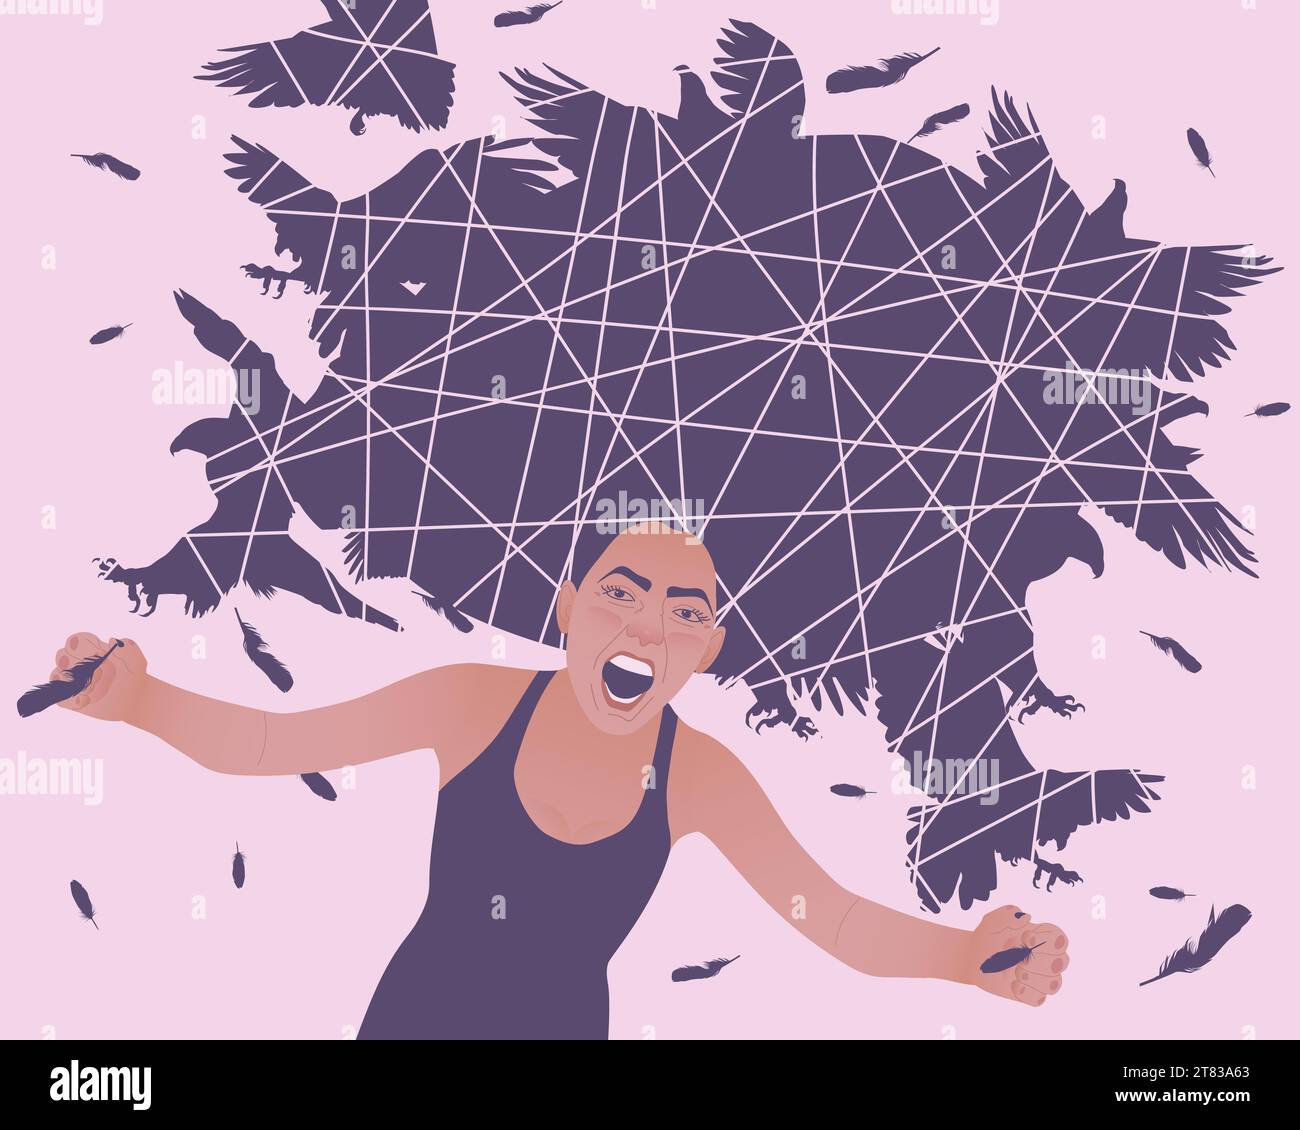 A woman on a pink background screams in rage.Predatory black birds burst out of her hair tangled with hopelessness. Illustration on the topic of outbu Stock Vector